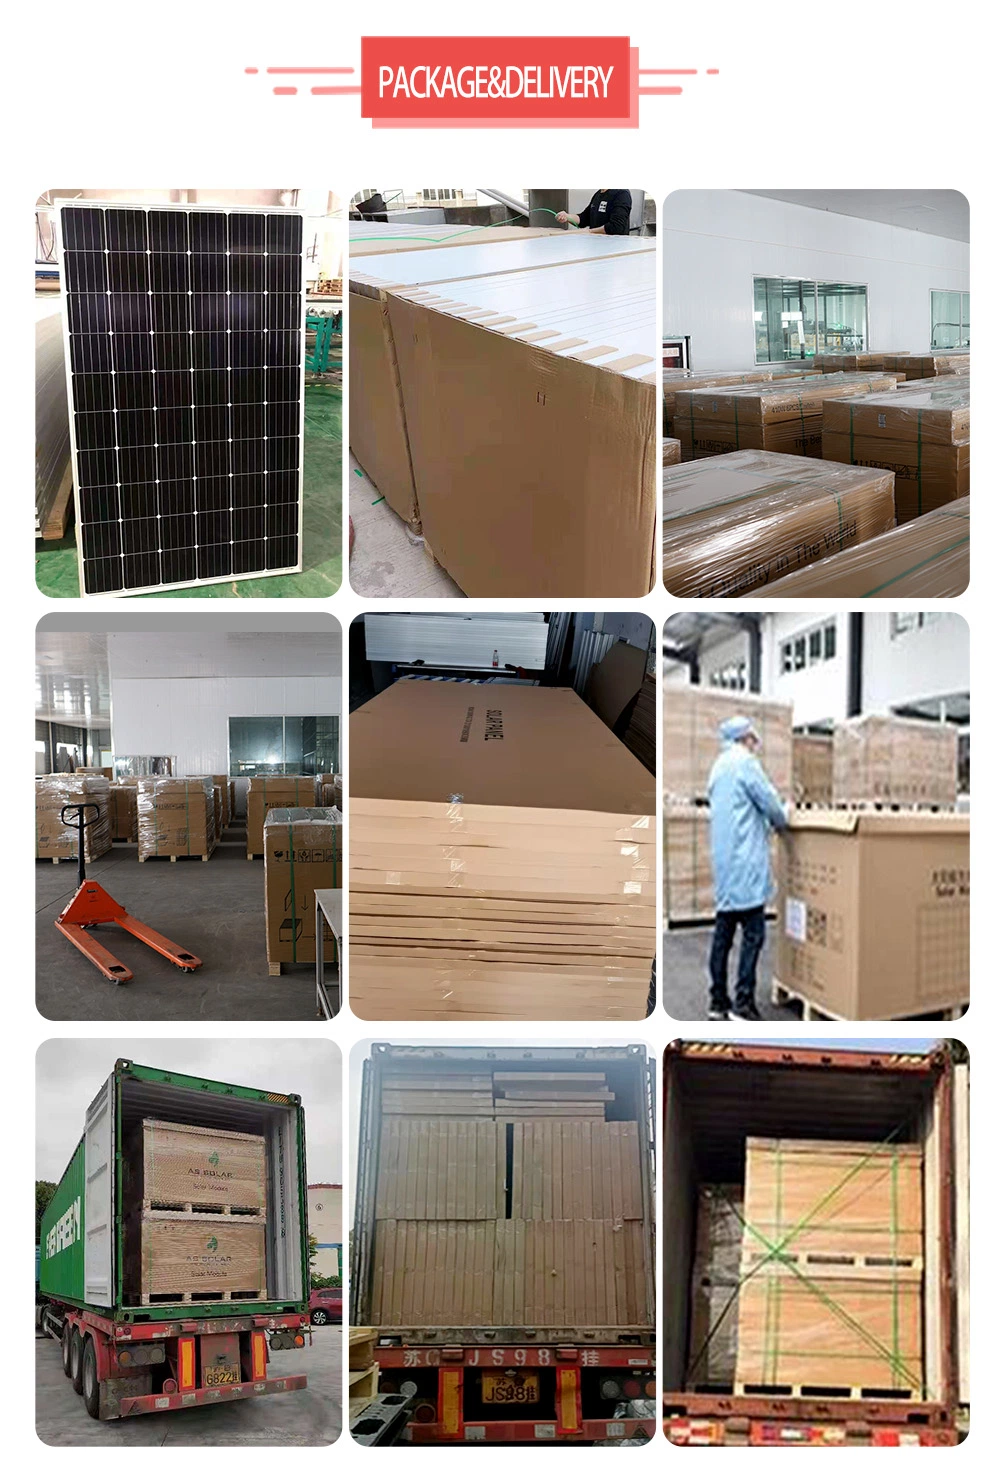 Tier 1 Mono Monocrystalline PV Module N Type 450W 500W 550W 580W 660W Solar Power Energy Panel for Home Rooftop and Industry Solar System